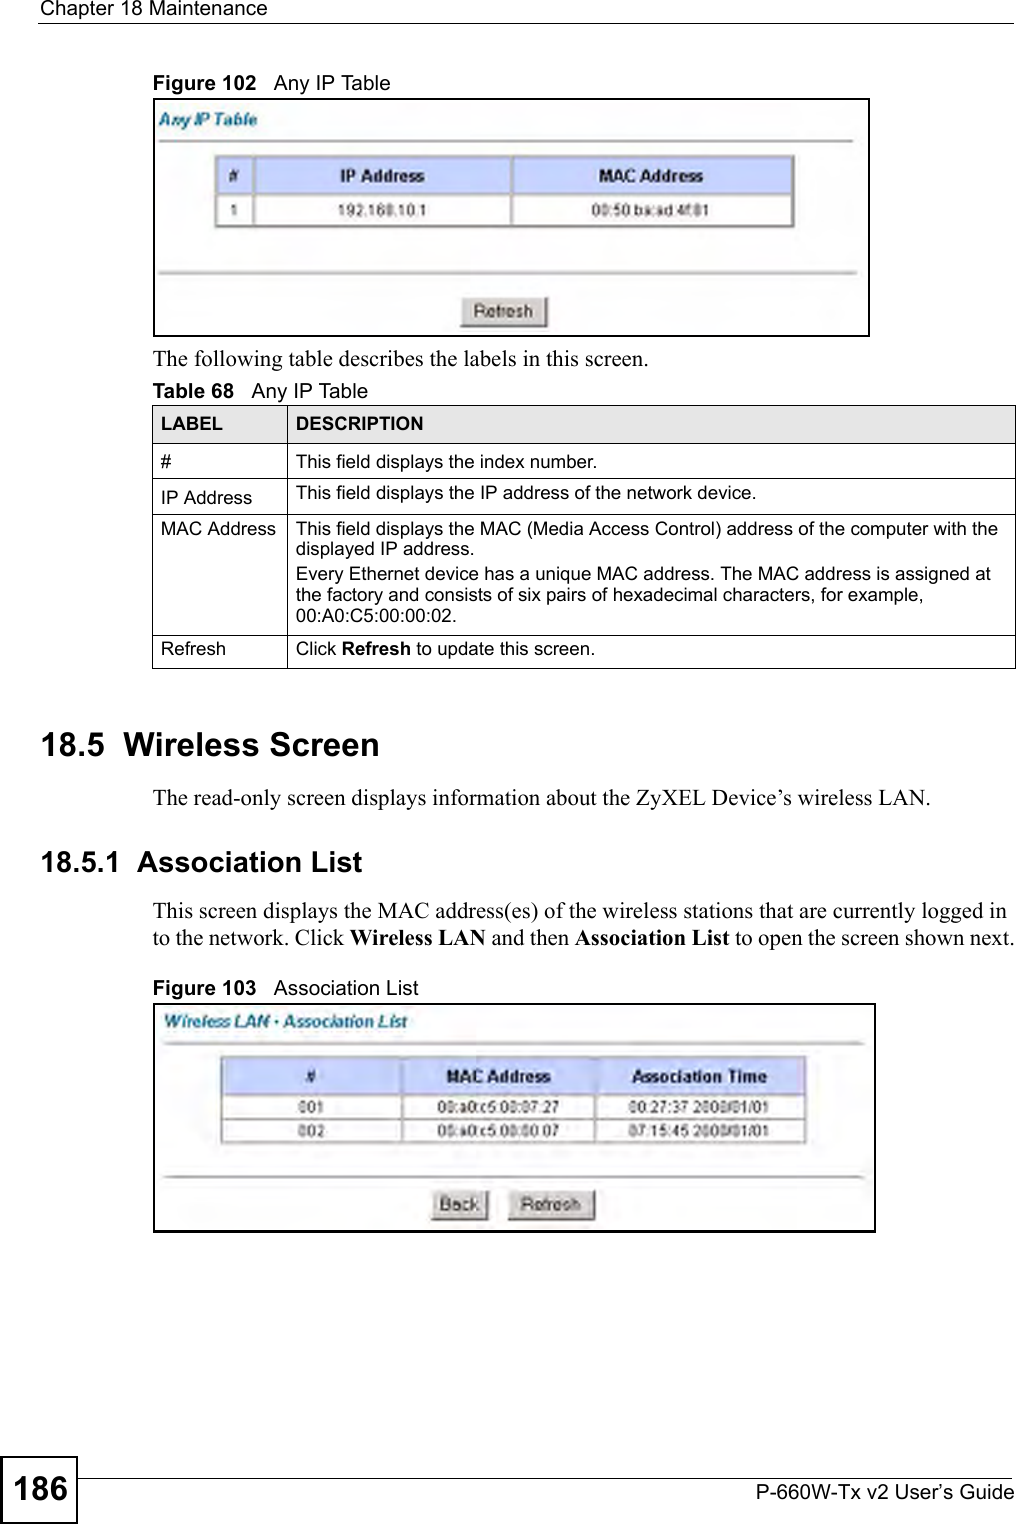 Chapter 18 MaintenanceP-660W-Tx v2 User’s Guide186Figure 102   Any IP TableThe following table describes the labels in this screen. 18.5  Wireless Screen The read-only screen displays information about the ZyXEL Device’s wireless LAN.18.5.1  Association List This screen displays the MAC address(es) of the wireless stations that are currently logged in to the network. Click Wireless LAN and then Association List to open the screen shown next.Figure 103   Association ListTable 68   Any IP TableLABEL DESCRIPTION#This field displays the index number. IP Address This field displays the IP address of the network device. MAC Address This field displays the MAC (Media Access Control) address of the computer with the displayed IP address.Every Ethernet device has a unique MAC address. The MAC address is assigned at the factory and consists of six pairs of hexadecimal characters, for example, 00:A0:C5:00:00:02.Refresh Click Refresh to update this screen. 